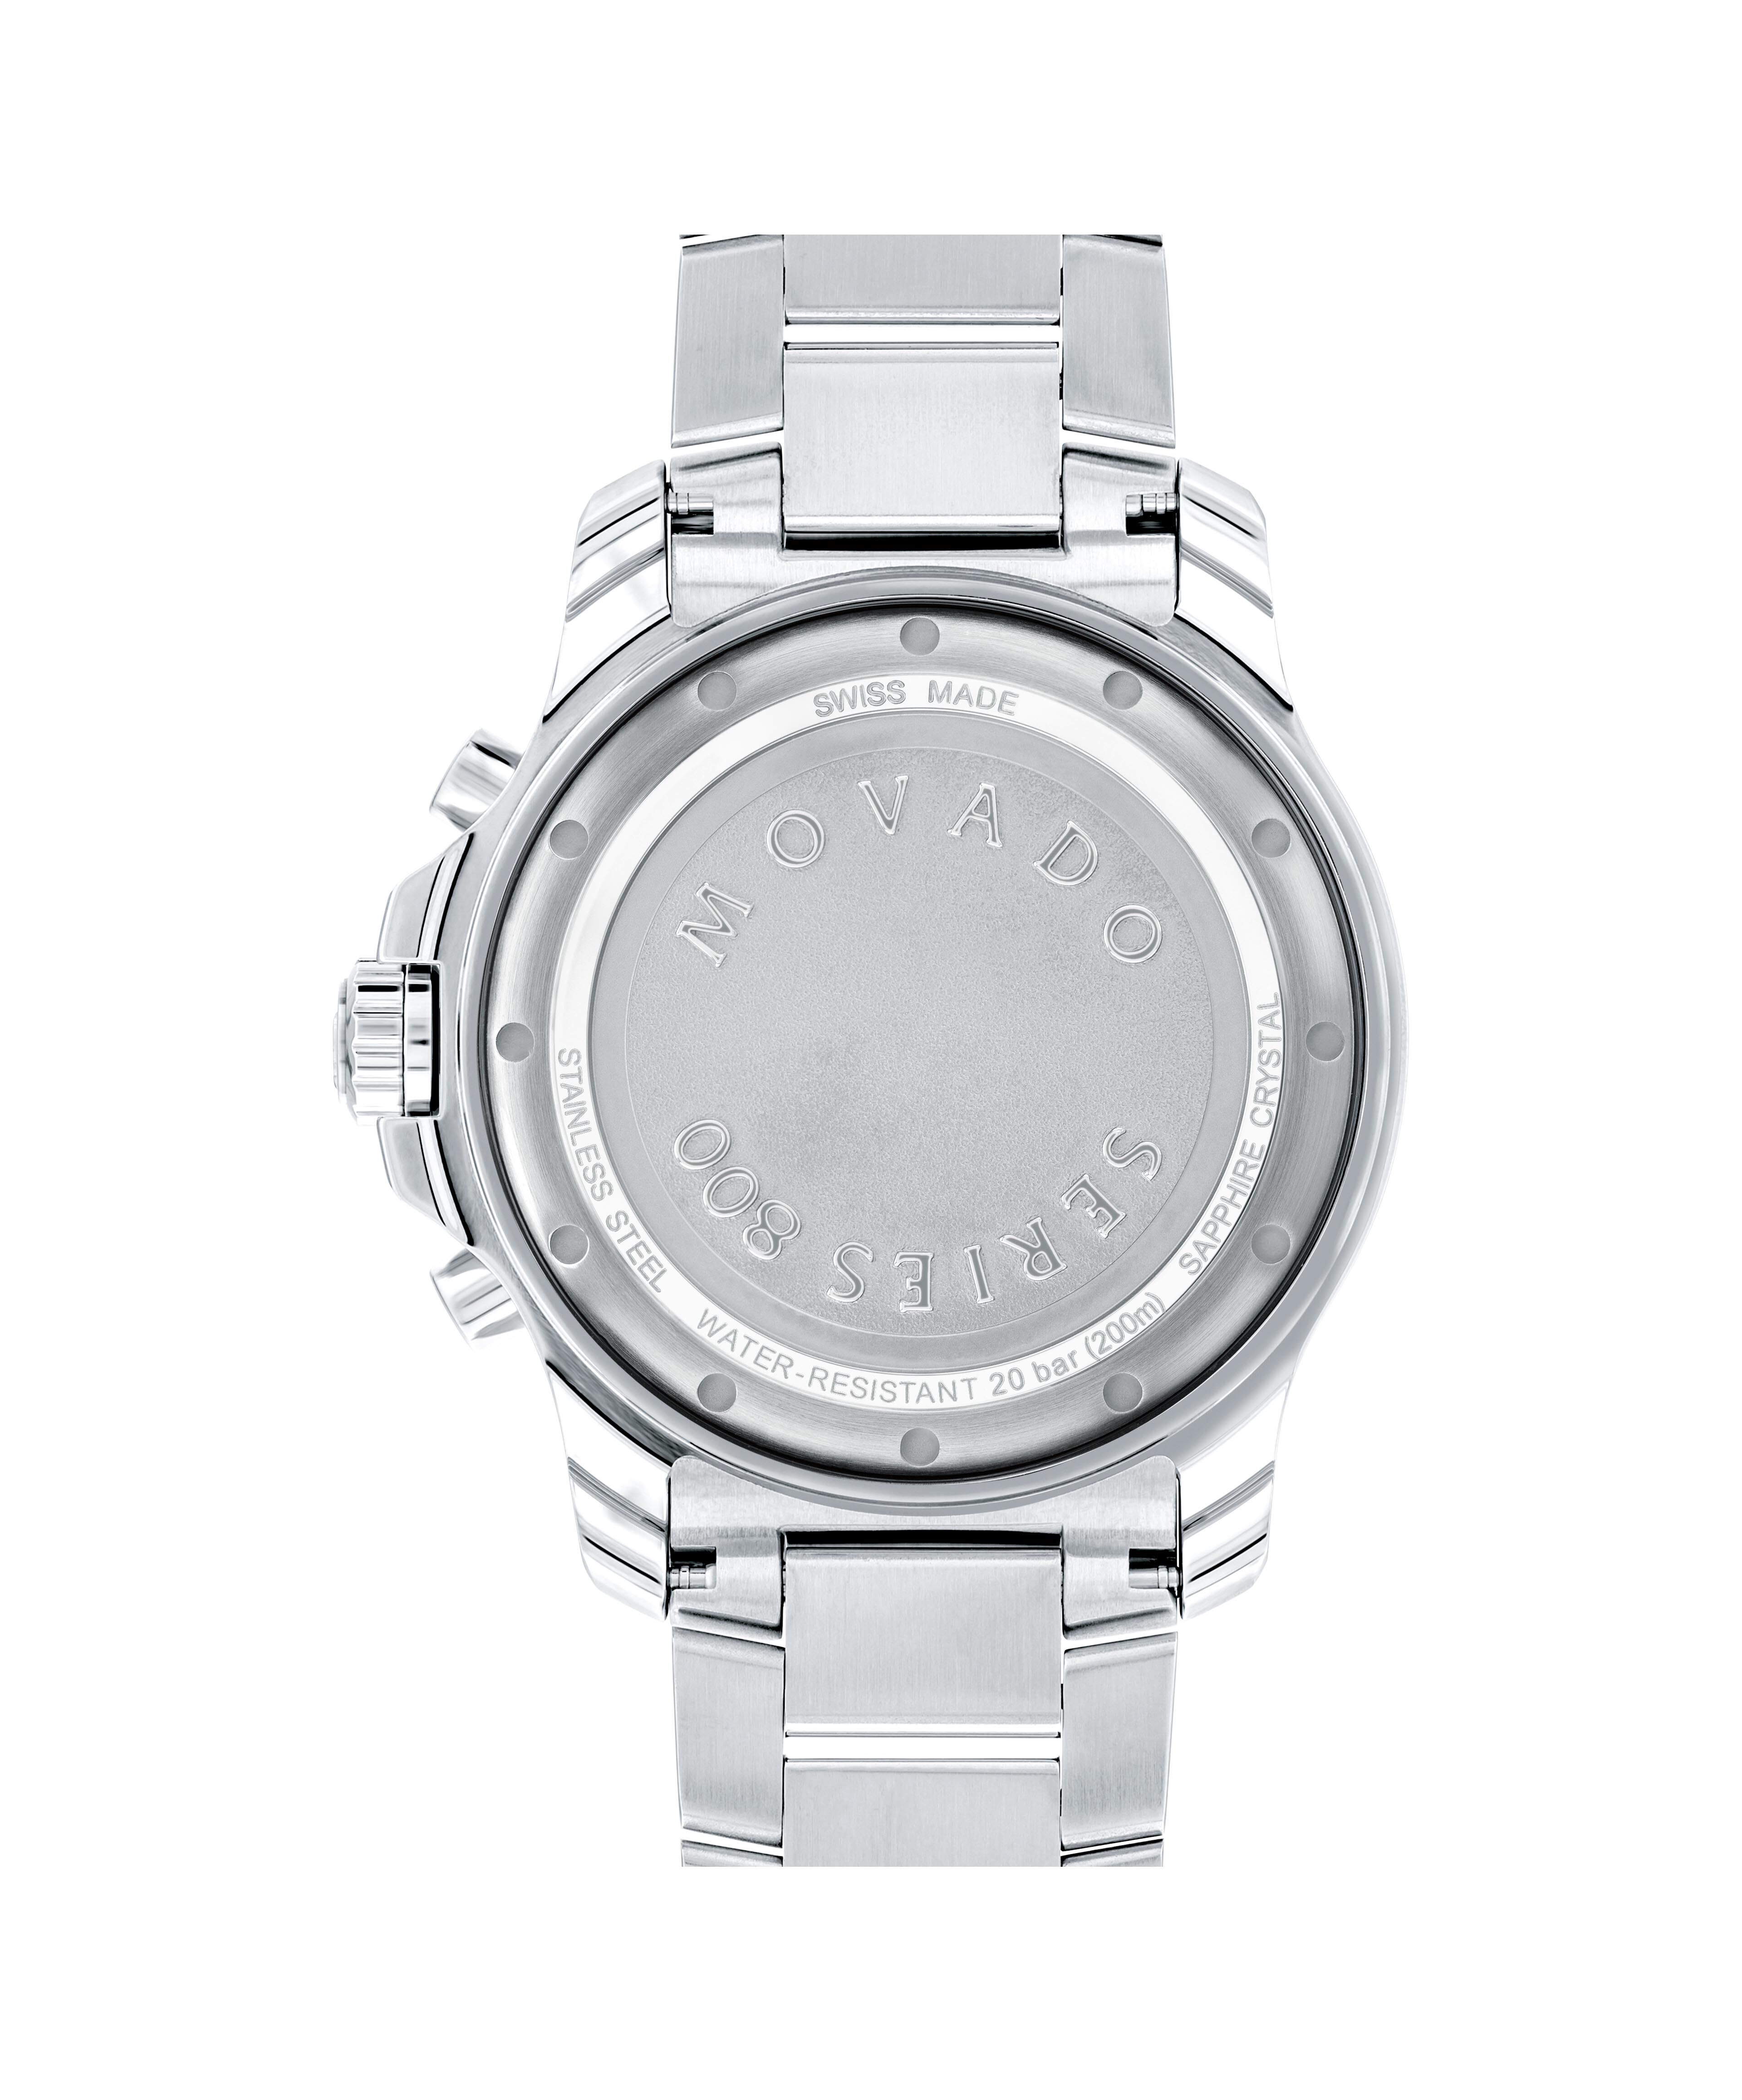 Movado Concerto 23.3.14.1117 S Women's Watch in Stainless Steel